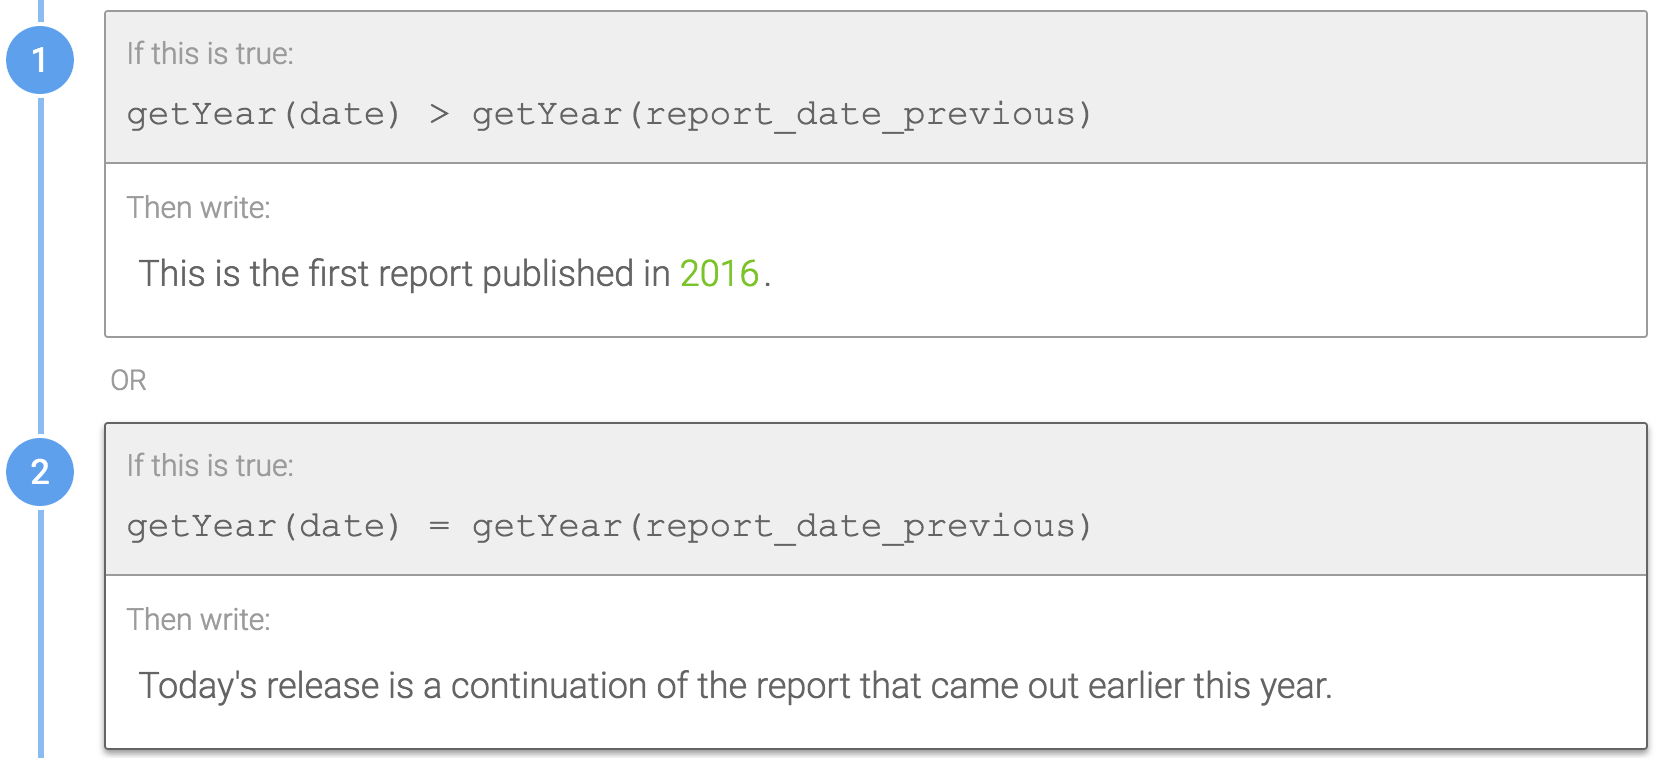 This Branch customizes the sentence based on a report's date and the previous report's date being the same year or not.